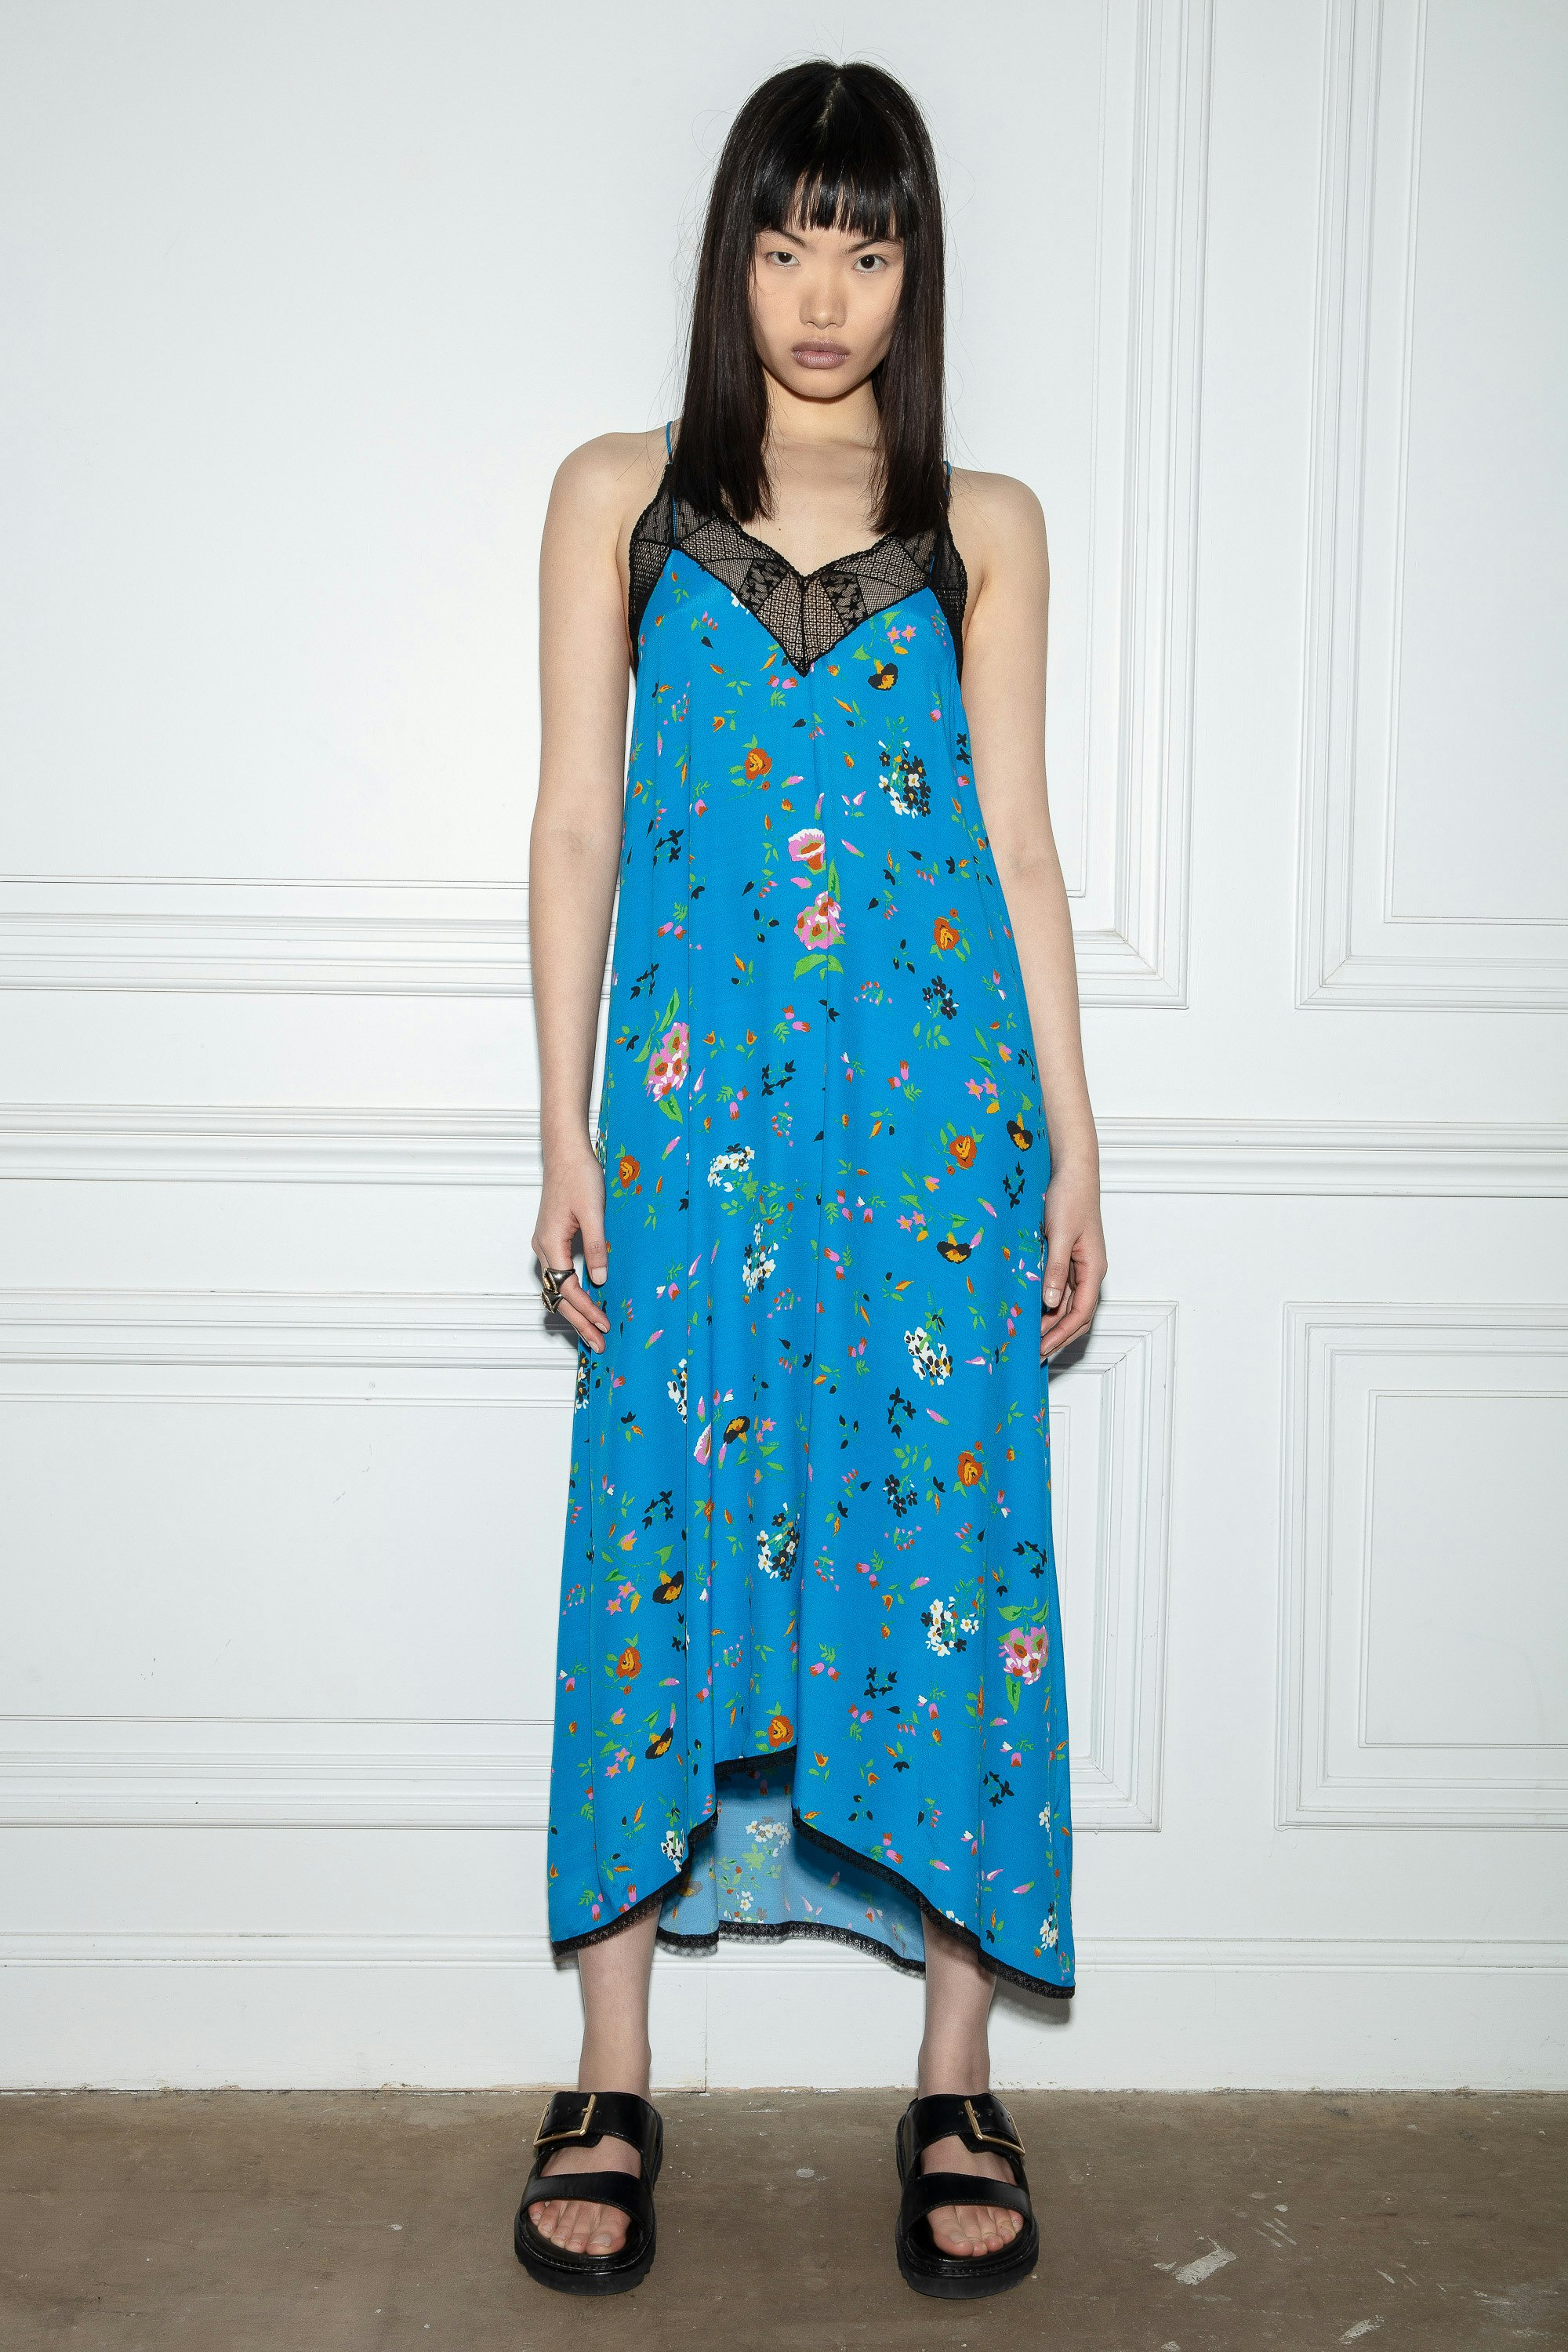 Risty Dress Women’s long blue flowing dress with thin straps, embellished with a floral print and contrasting lace edges